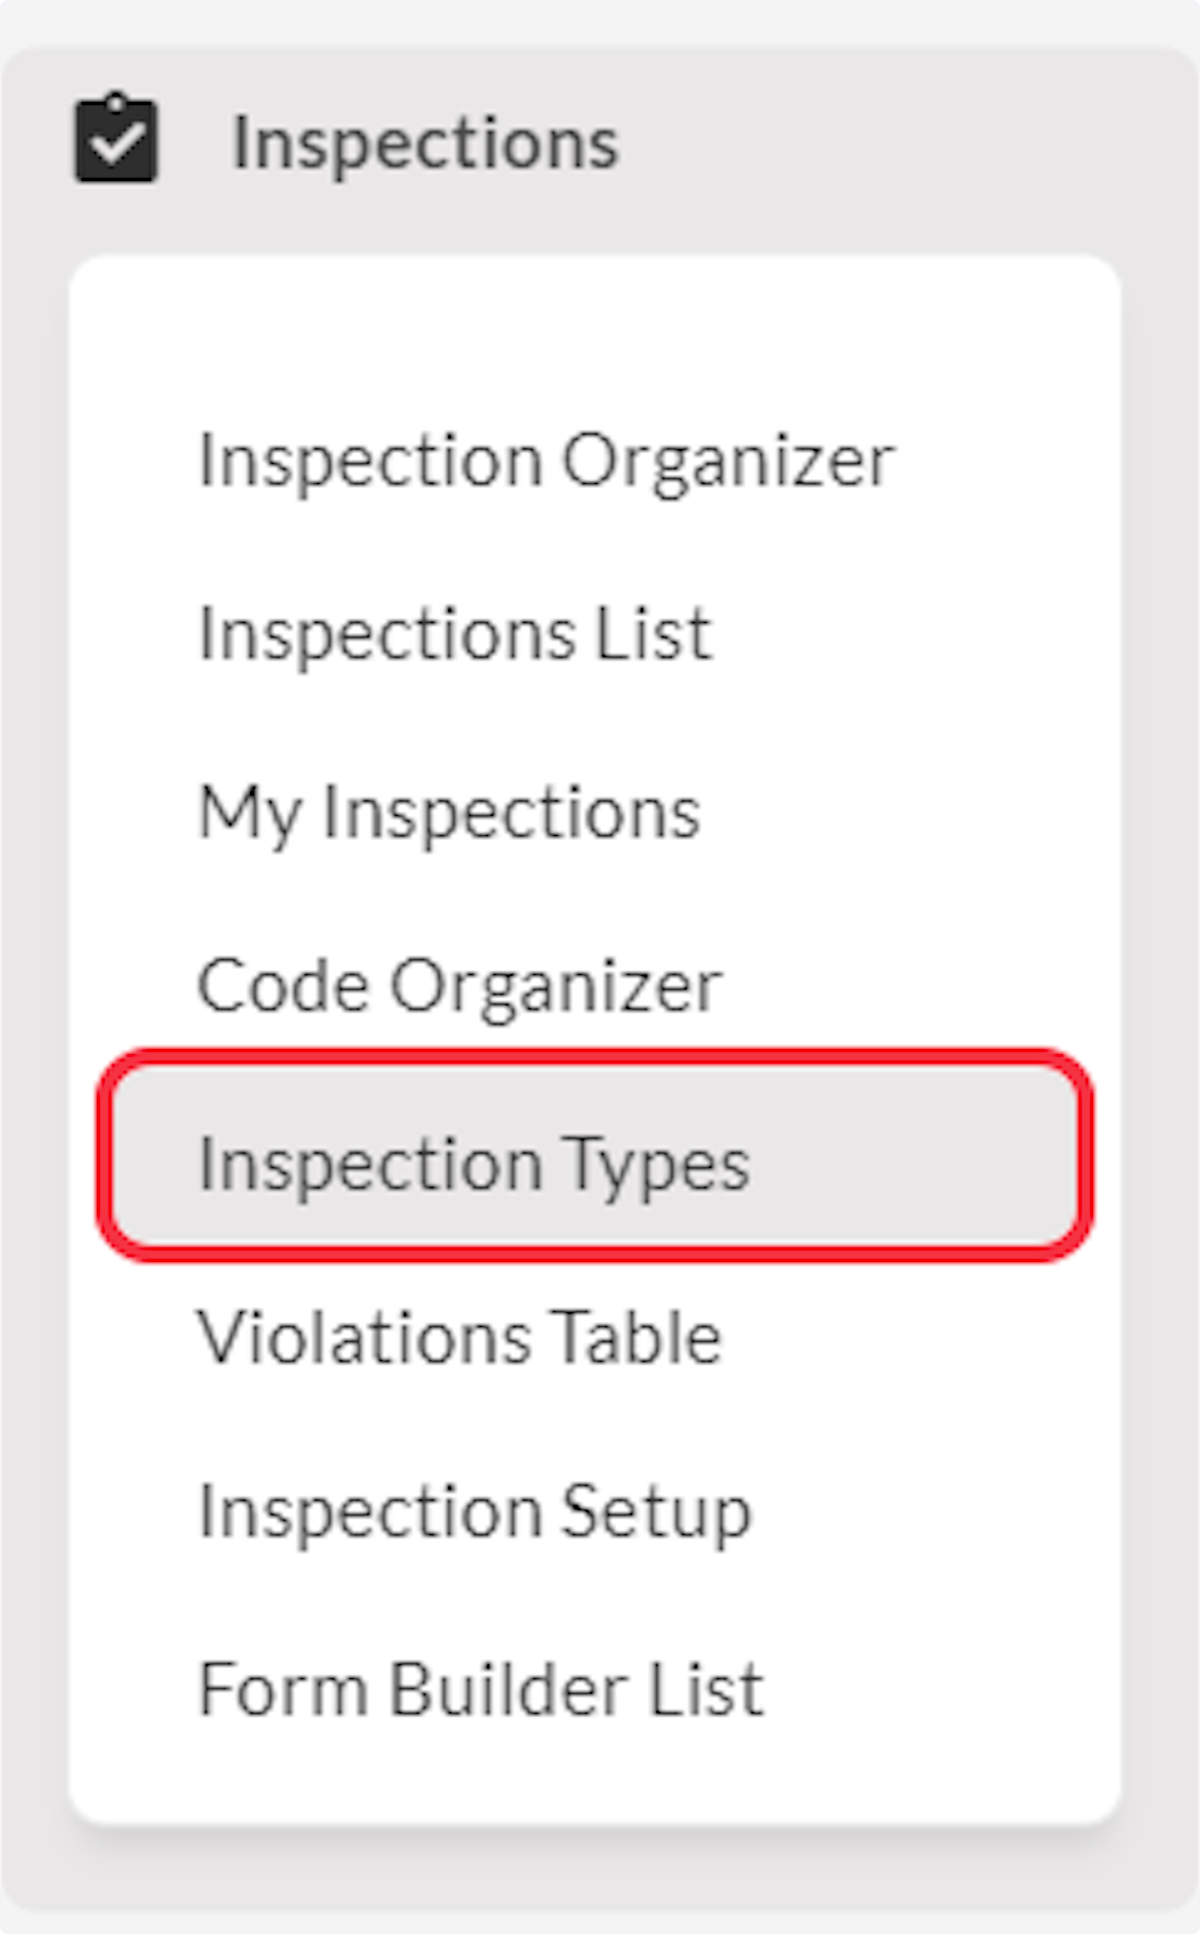 Click on Inspection Types.